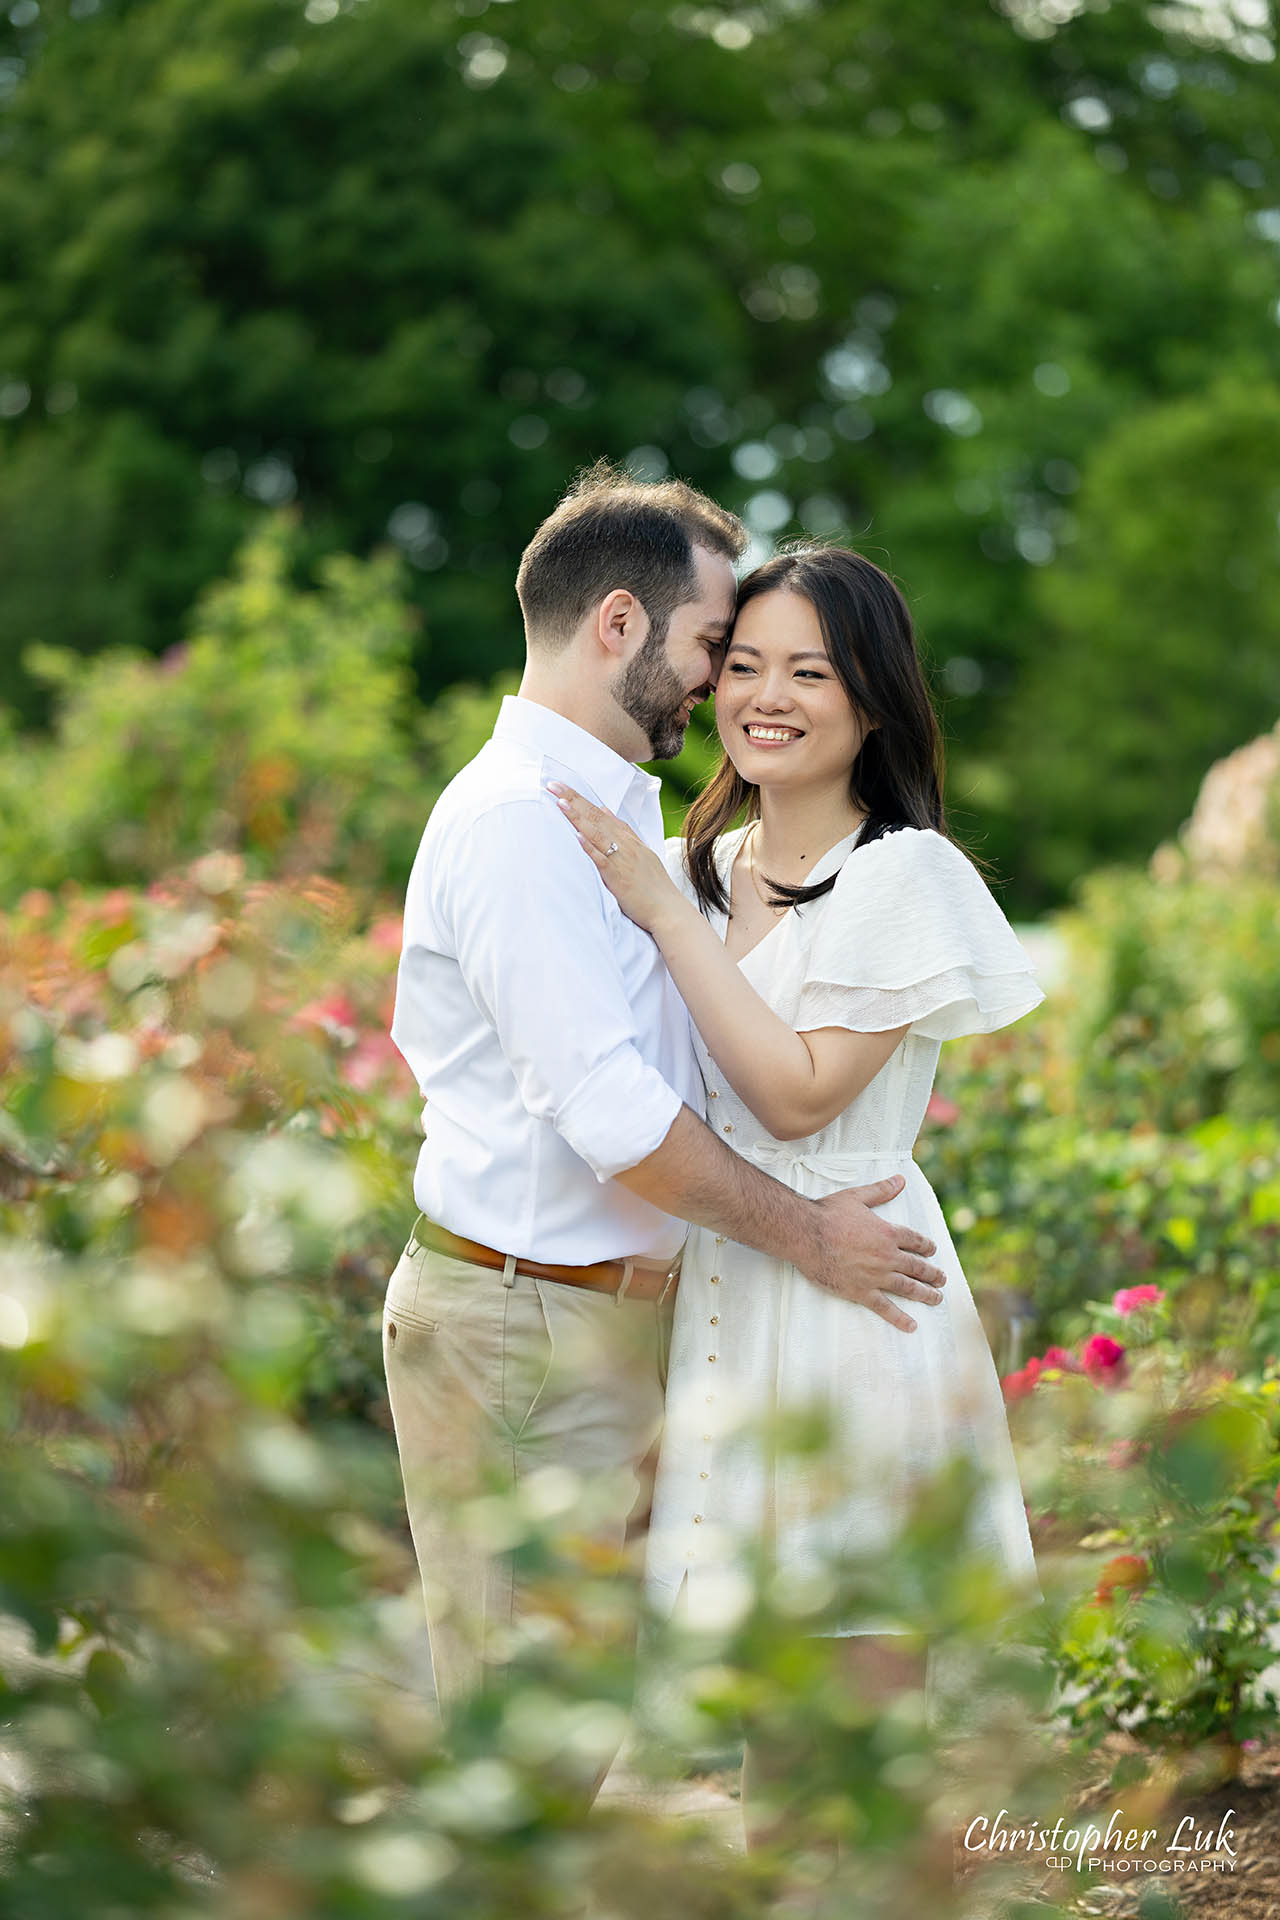 Bride with Groom Candid Natural Photojournalistic Organic Flower Garden Smile Portrait Sweet Laugh Cute Adorable Intimate Moment